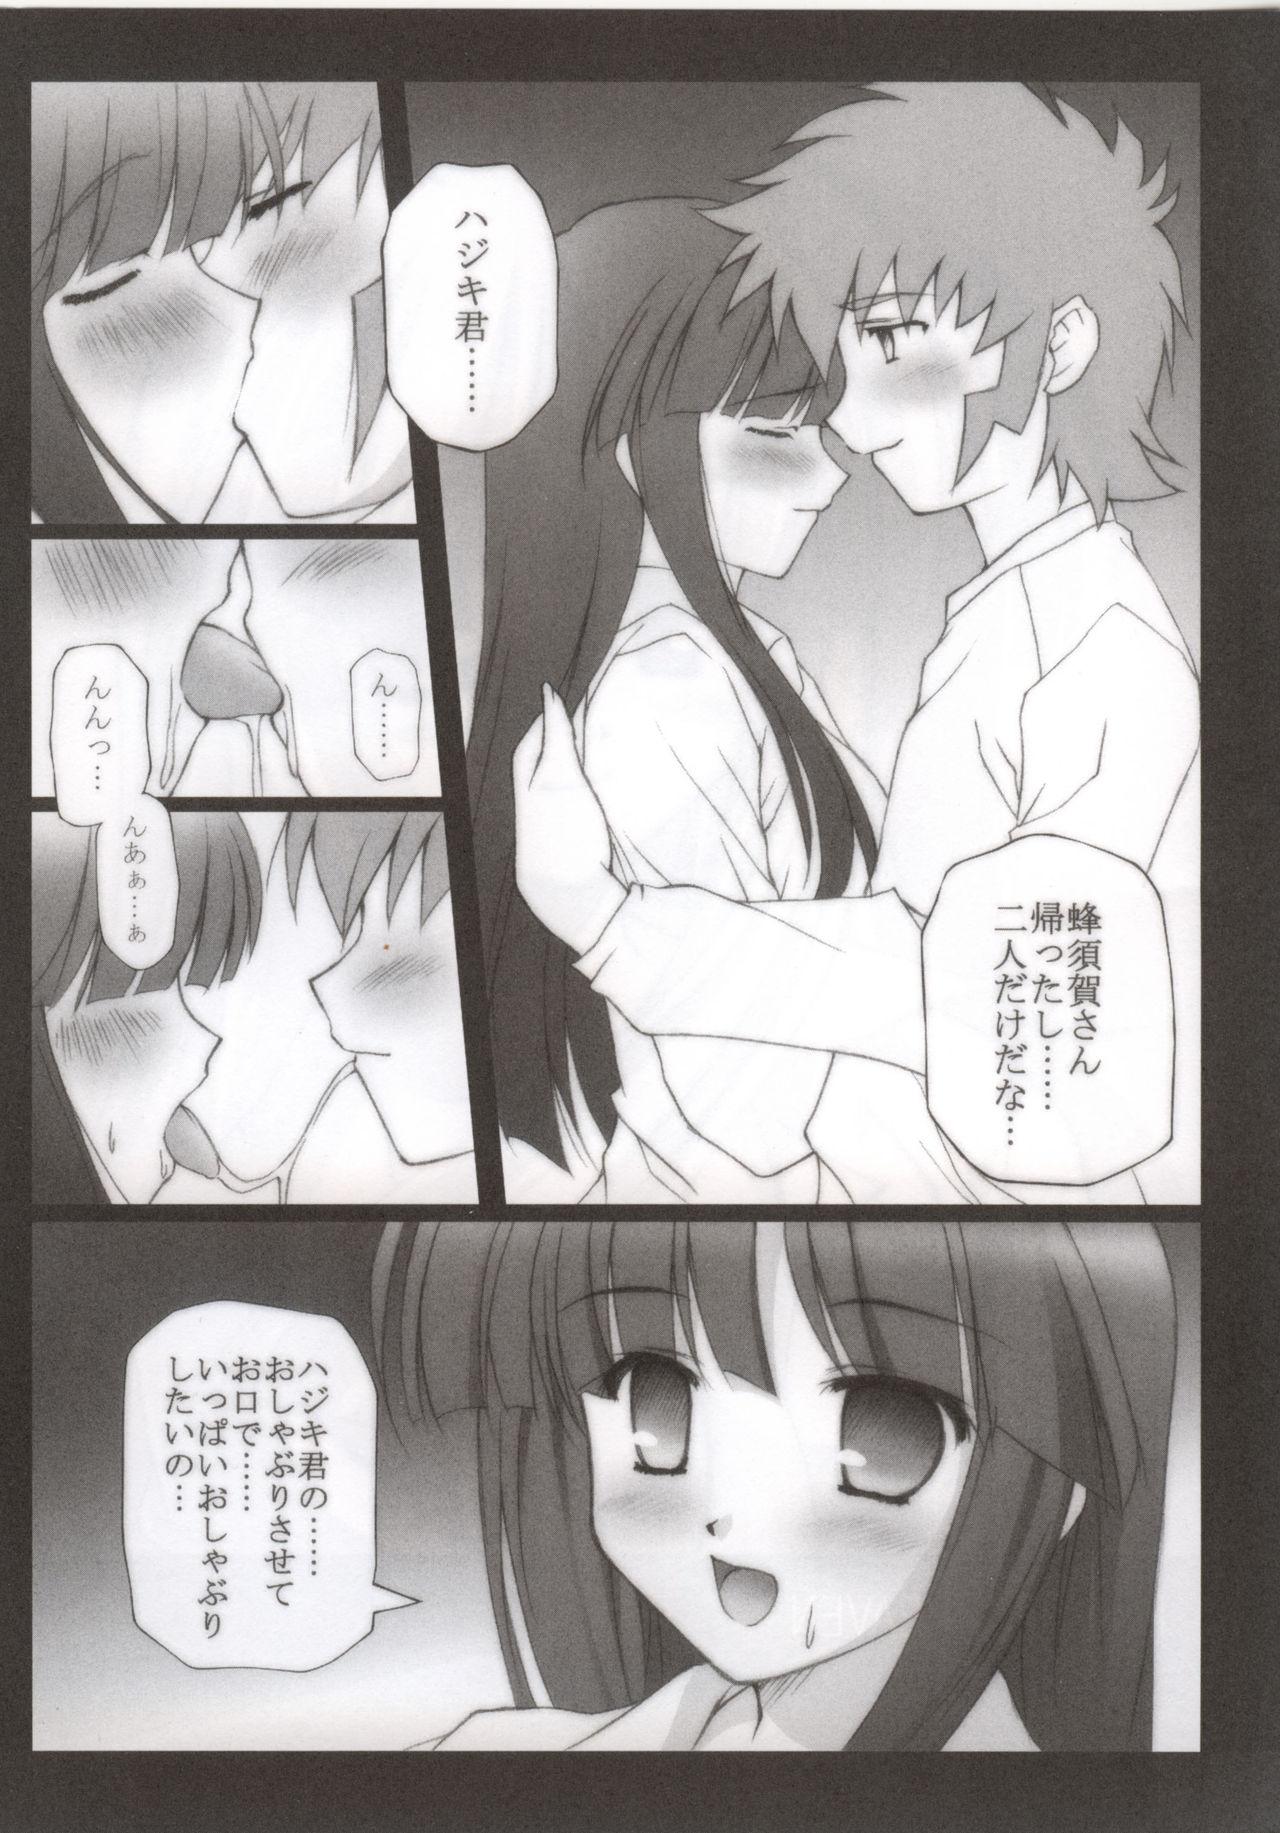 Real Amateur Feels like Heaven - Gad guard White album Handsome - Page 3